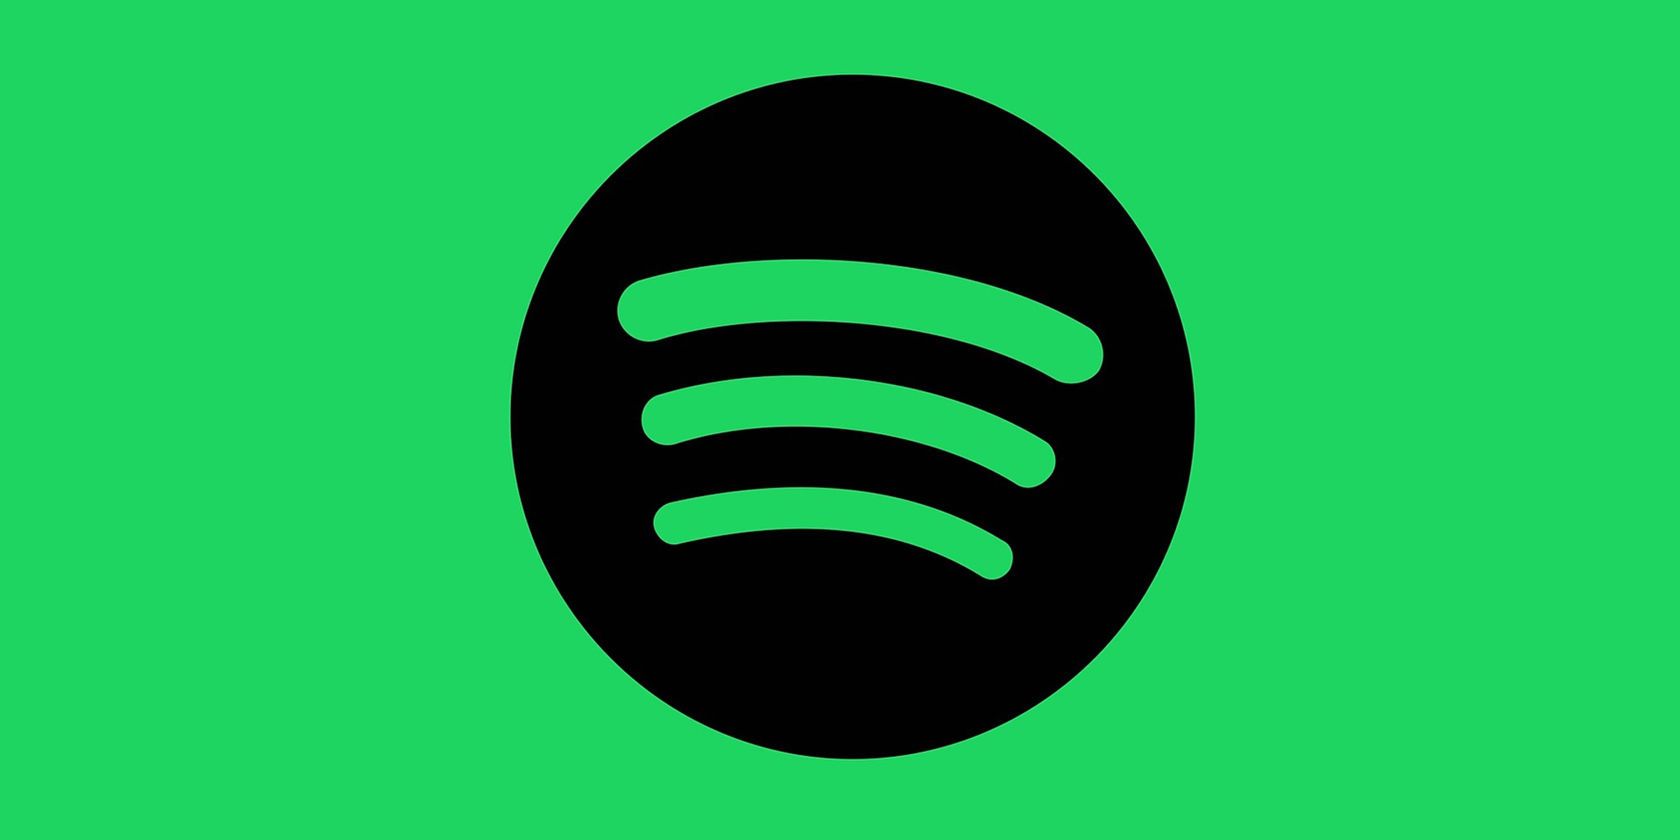 how much is spotify premium 2015